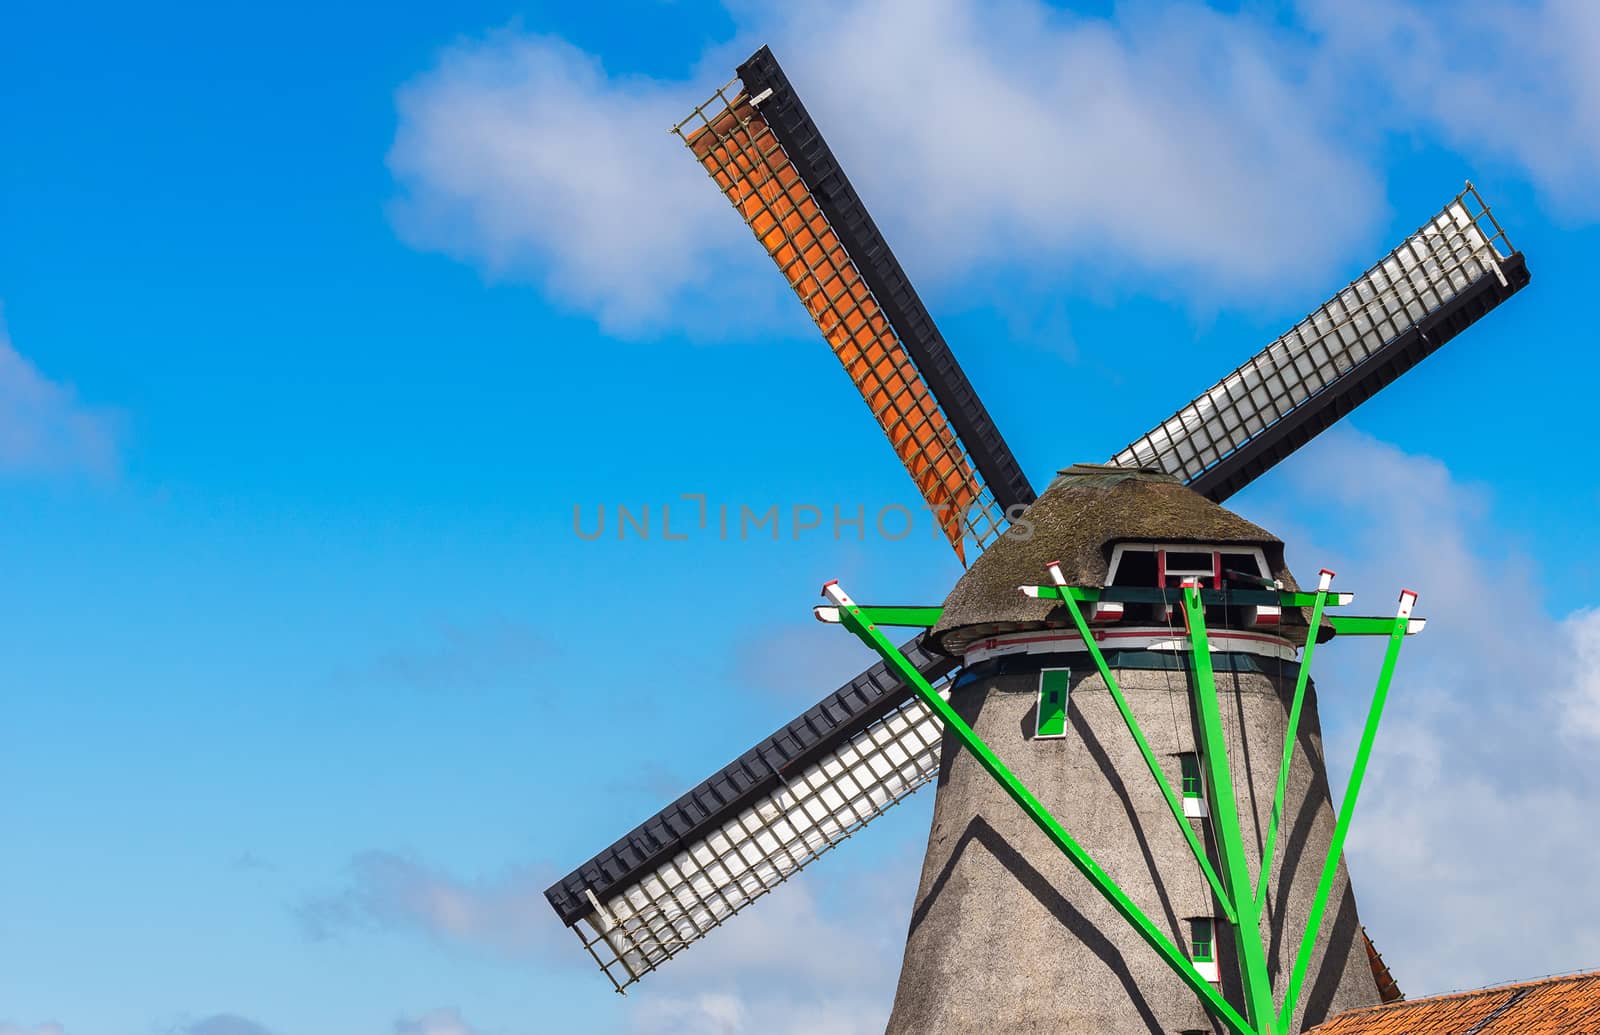 Windmill in agriculture farm with clear blue sky at Zaanse Schans, famous landmark near Amsterdam, Netherland, Europe